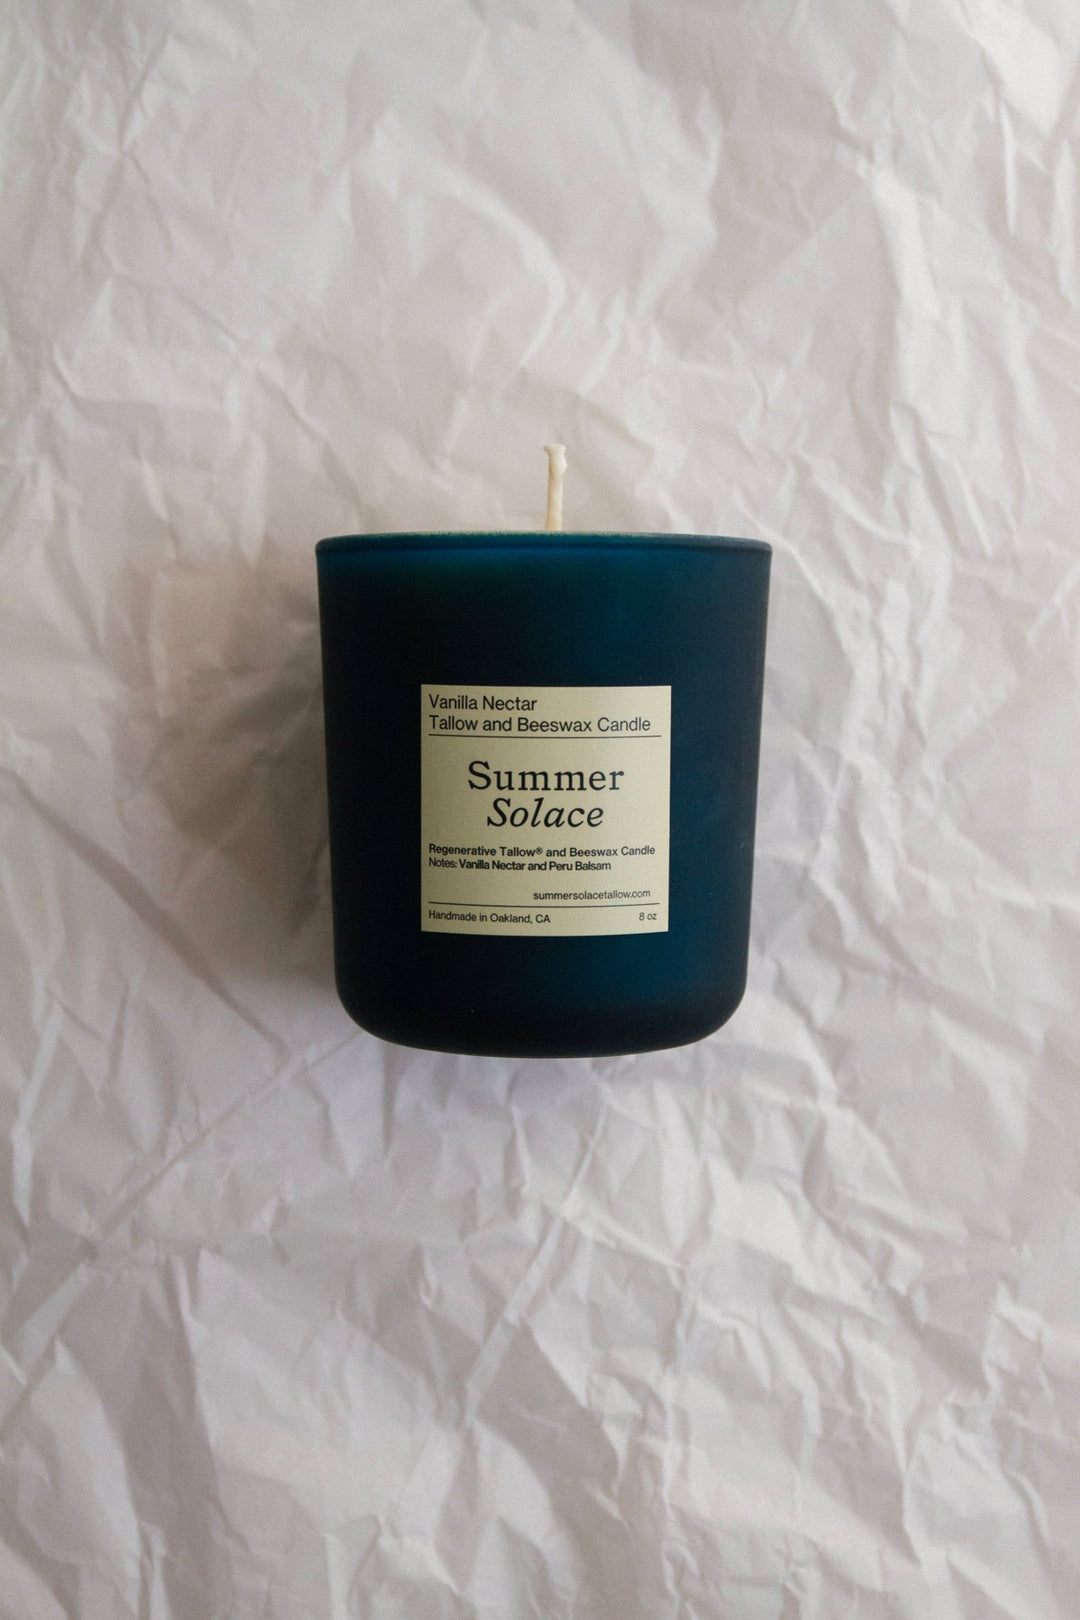 Summer Solace Tallow - NEW! Vanilla Nectar + Peru Balsam Tallow and Beeswax Candle 8 oz. - Candle